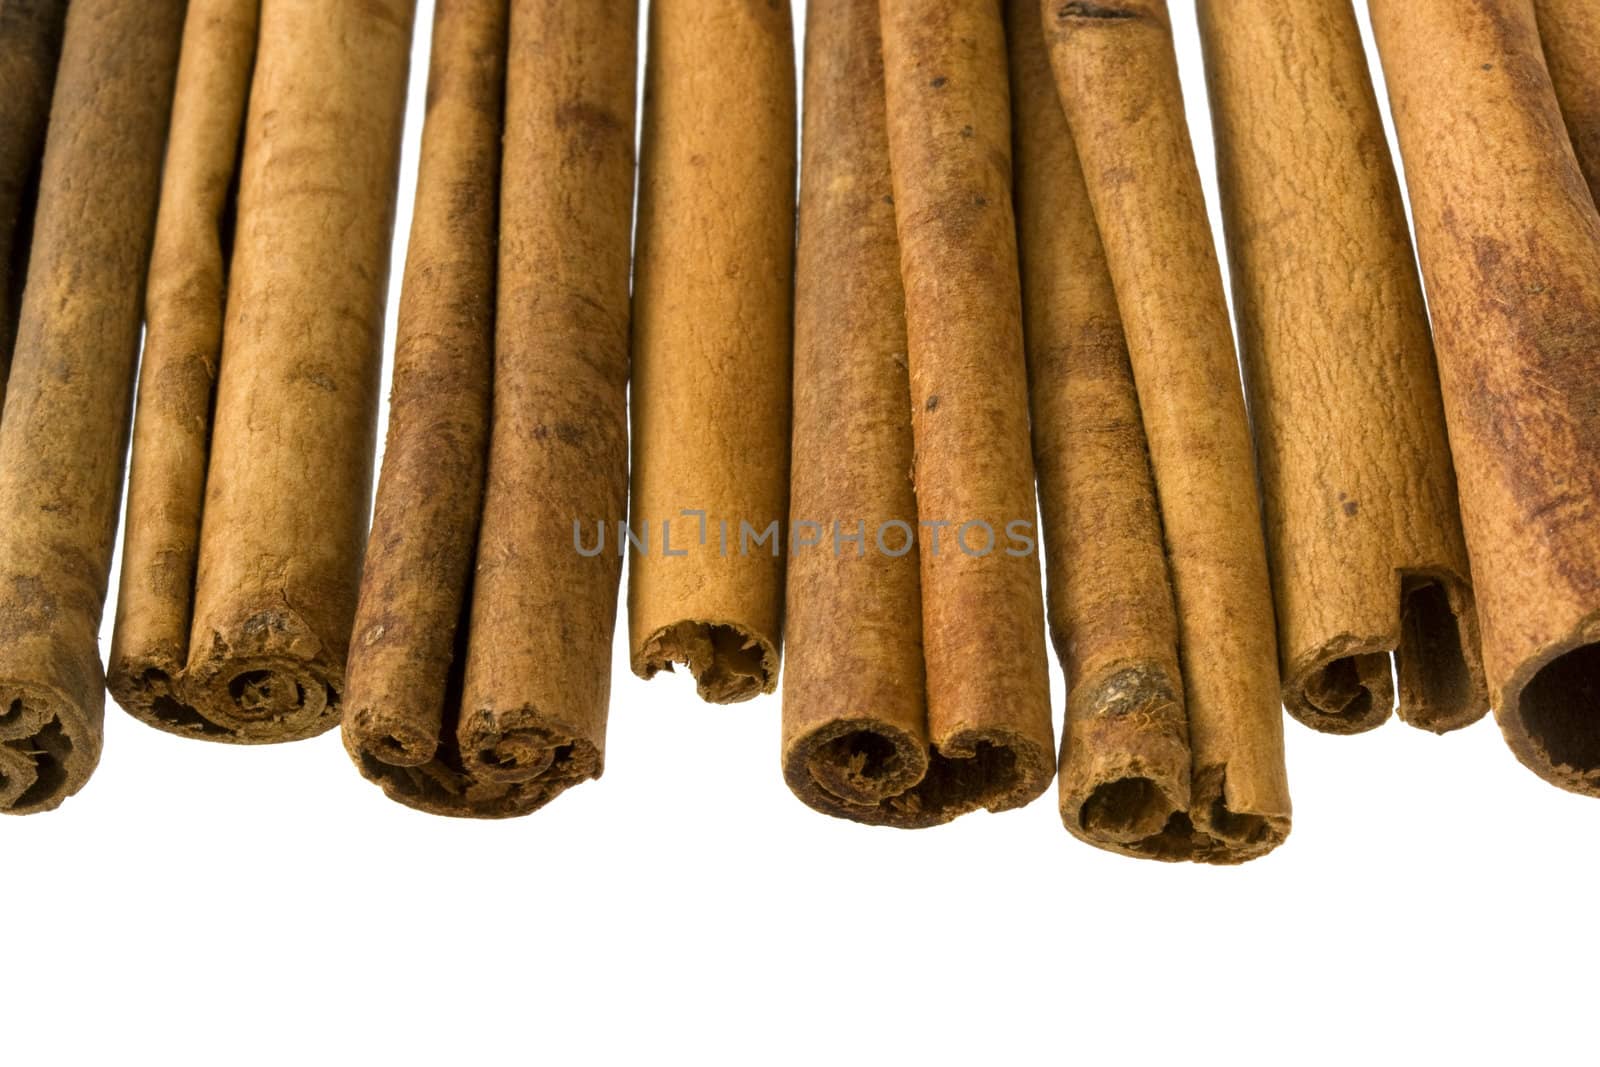 cinnamon sticks isolated on white background, focus on sticks ends